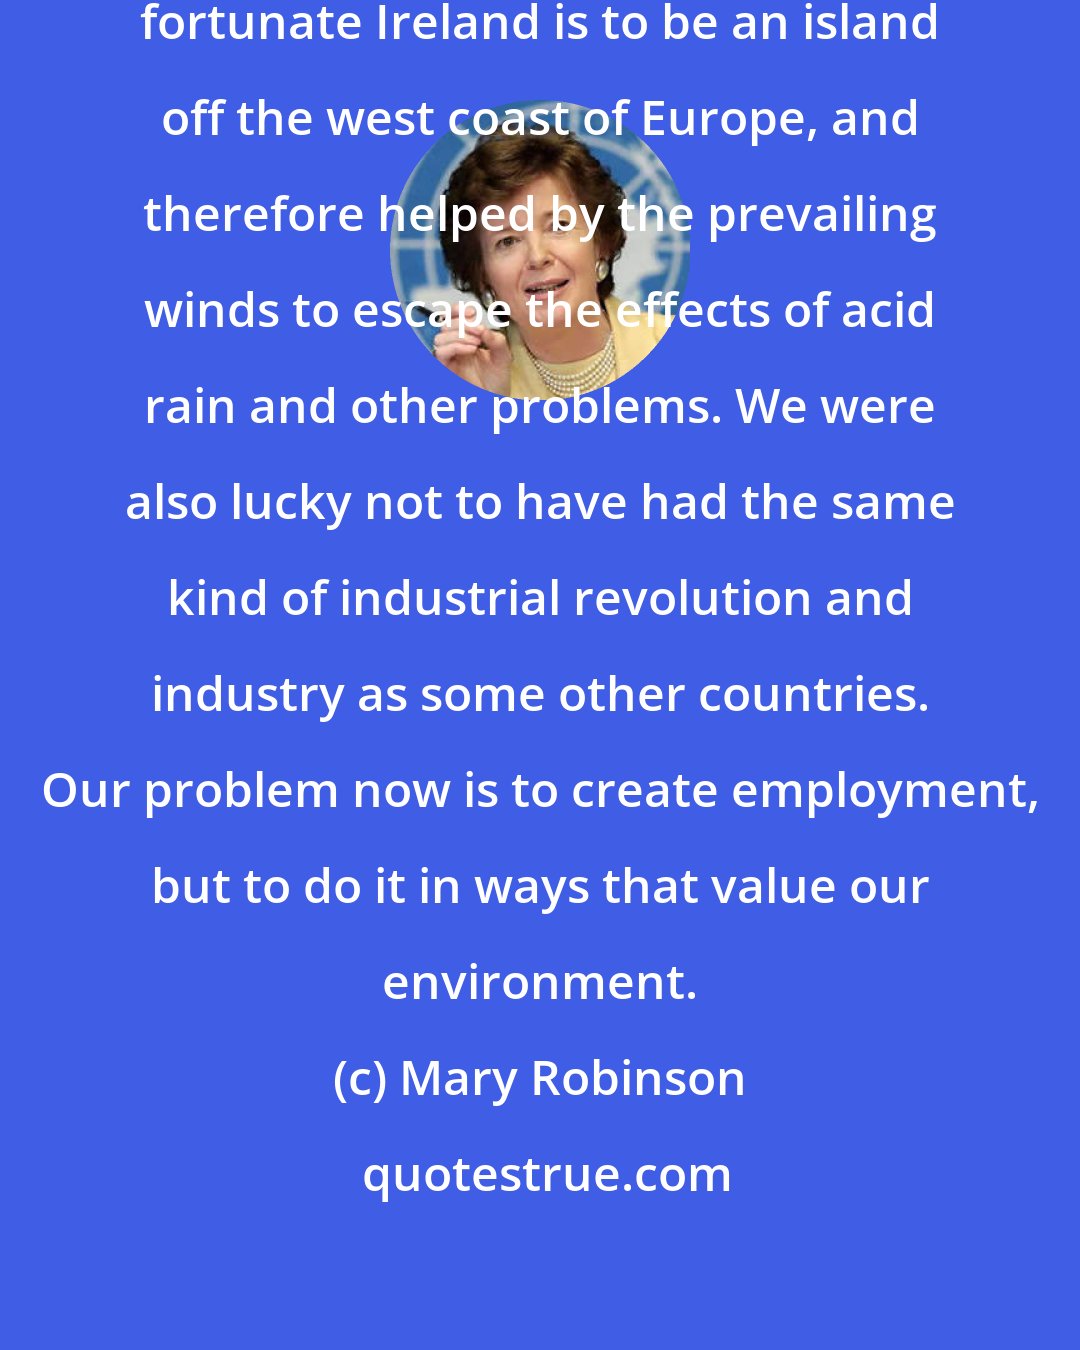 Mary Robinson: The first thing to recognize is how fortunate Ireland is to be an island off the west coast of Europe, and therefore helped by the prevailing winds to escape the effects of acid rain and other problems. We were also lucky not to have had the same kind of industrial revolution and industry as some other countries. Our problem now is to create employment, but to do it in ways that value our environment.